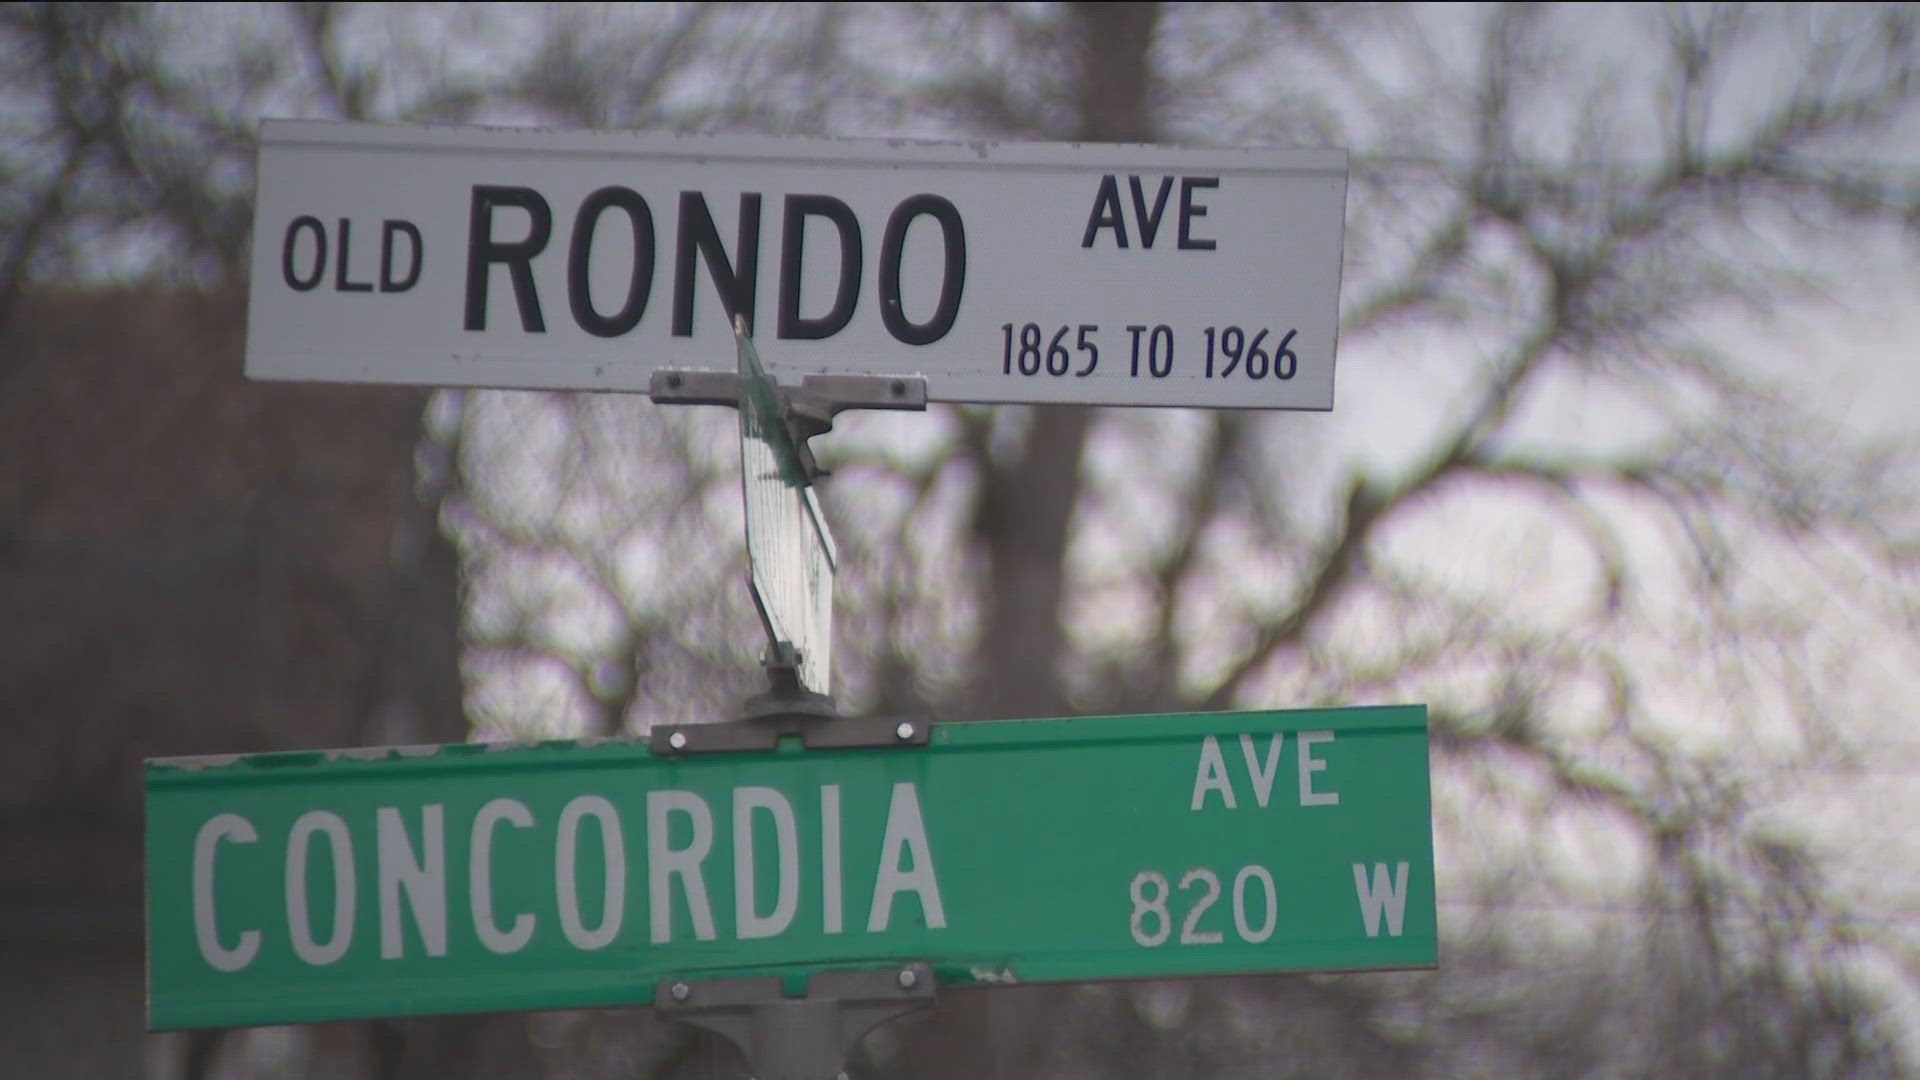 In December, the St. Paul City Council voted to rename Concordia Avenue as Rondo Avenue. Now, longtime advocates are celebrating the change.